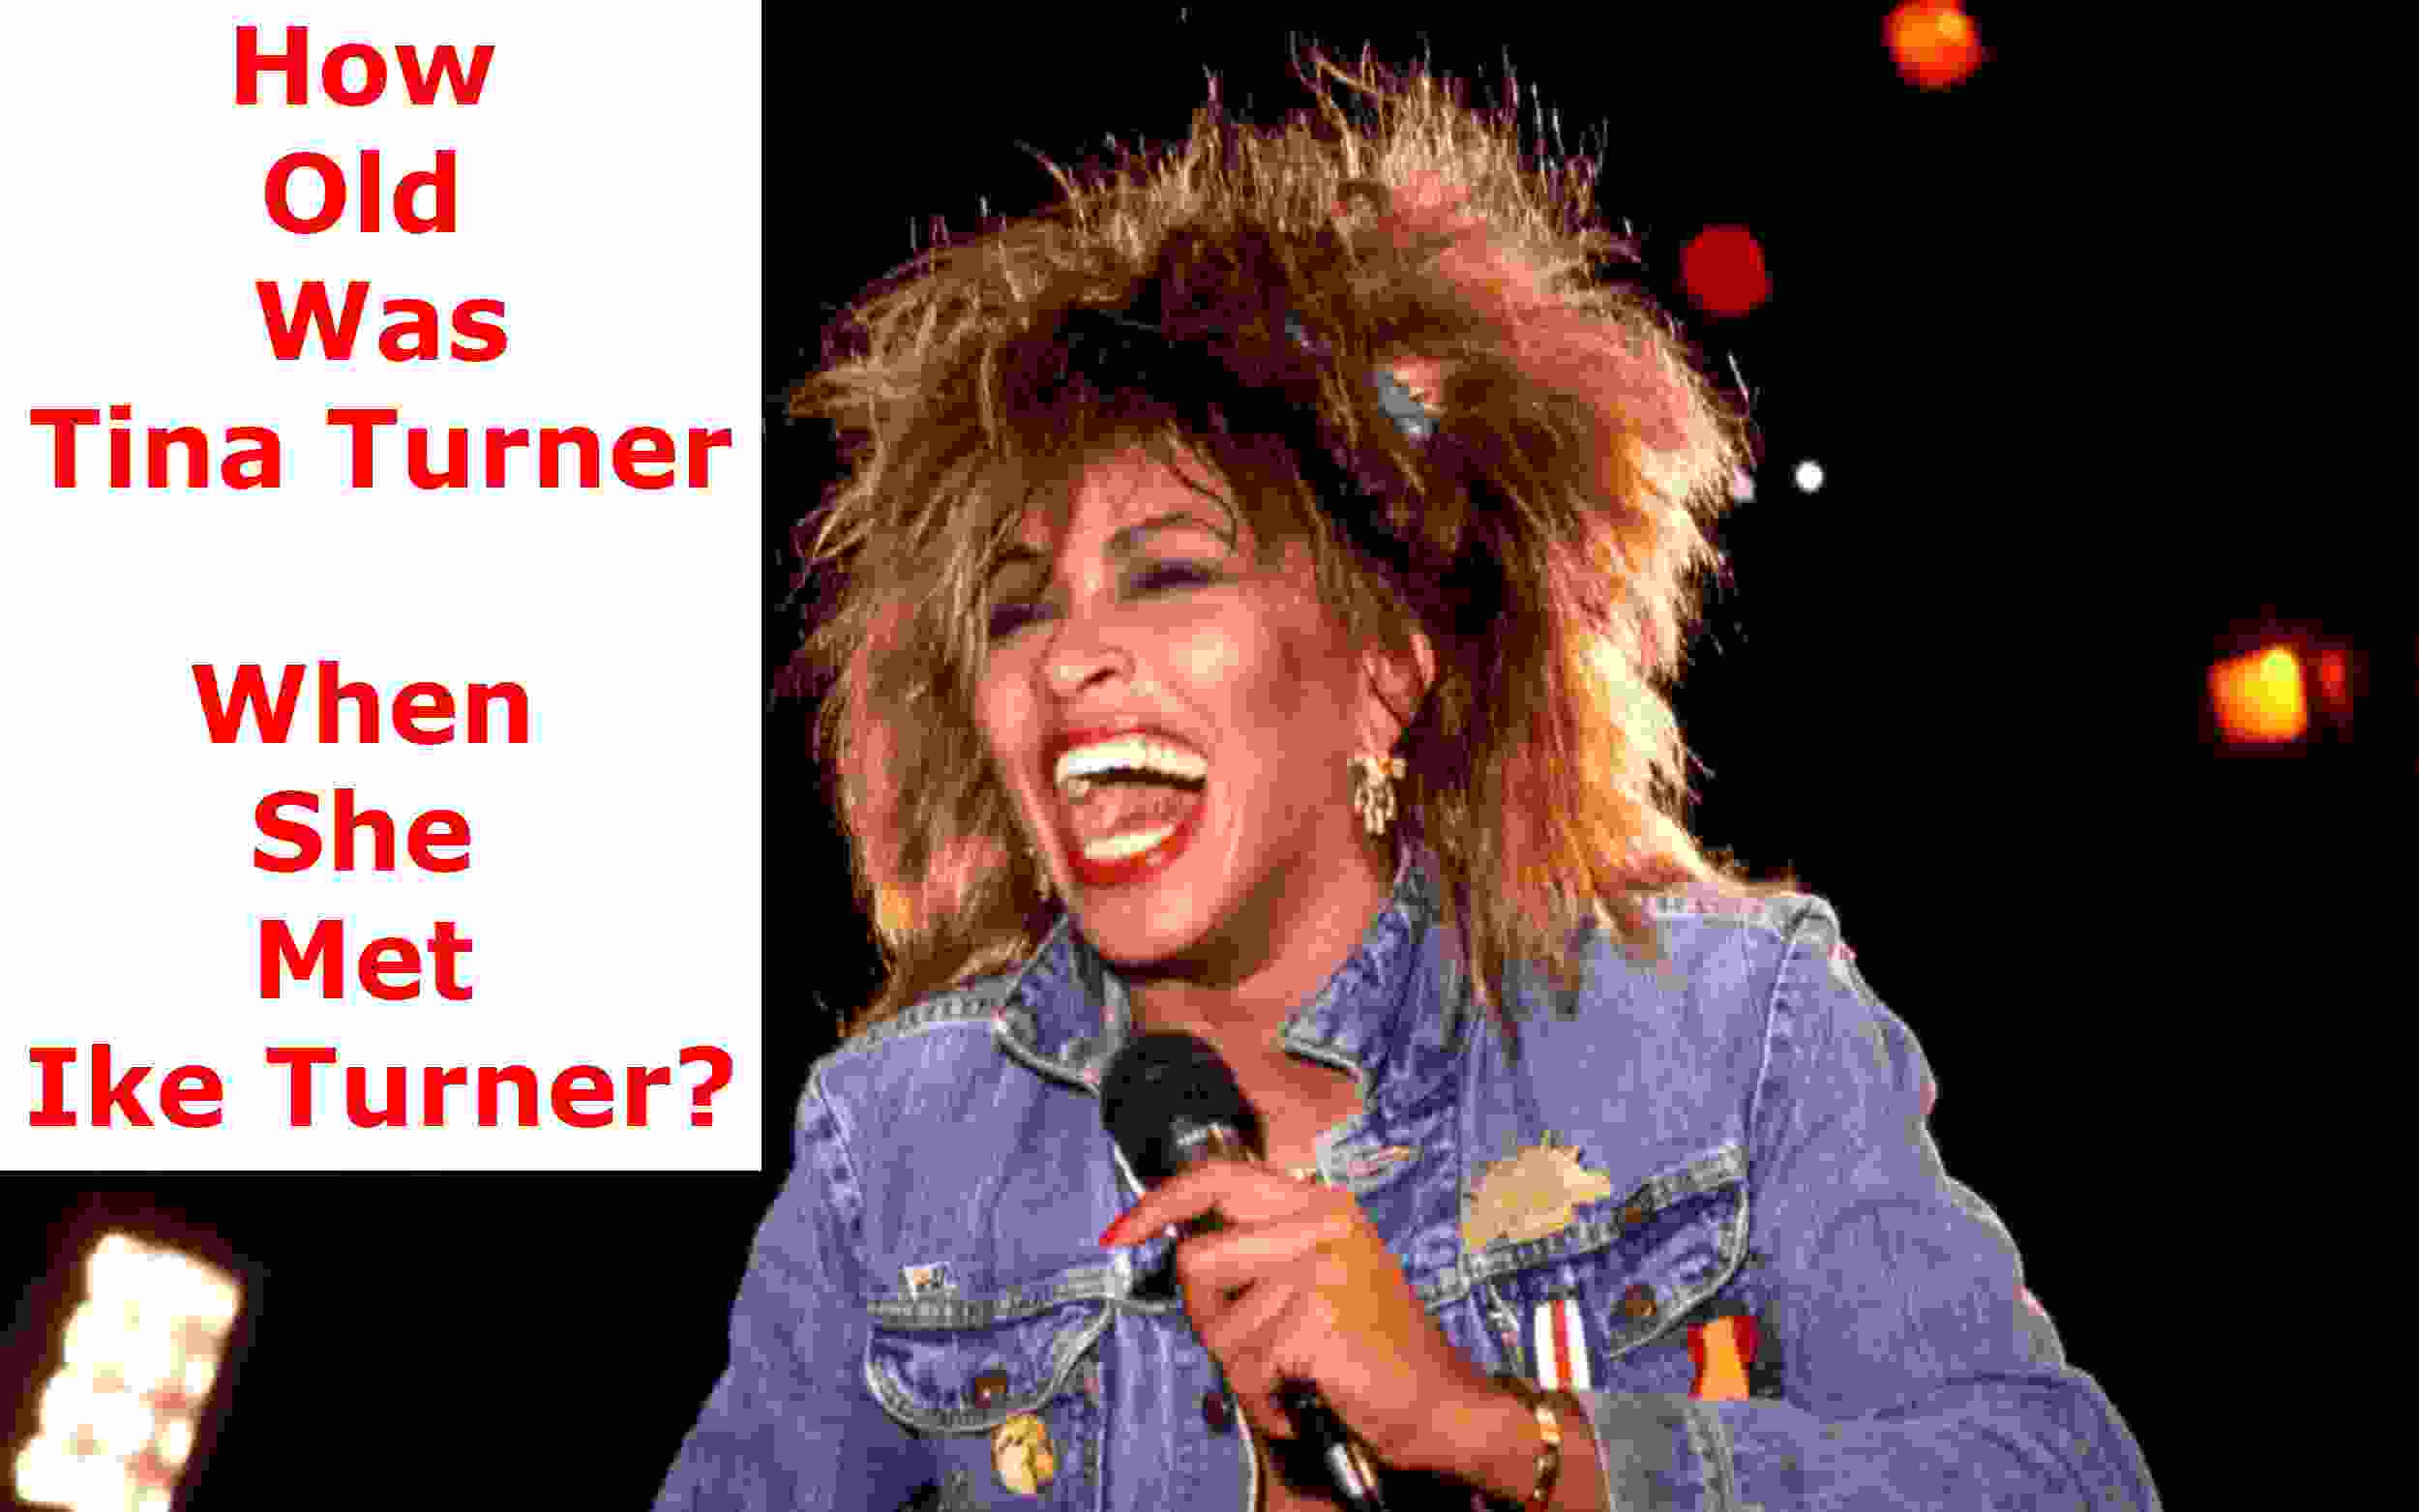 How Old Was Tina Turner When She Met Ike